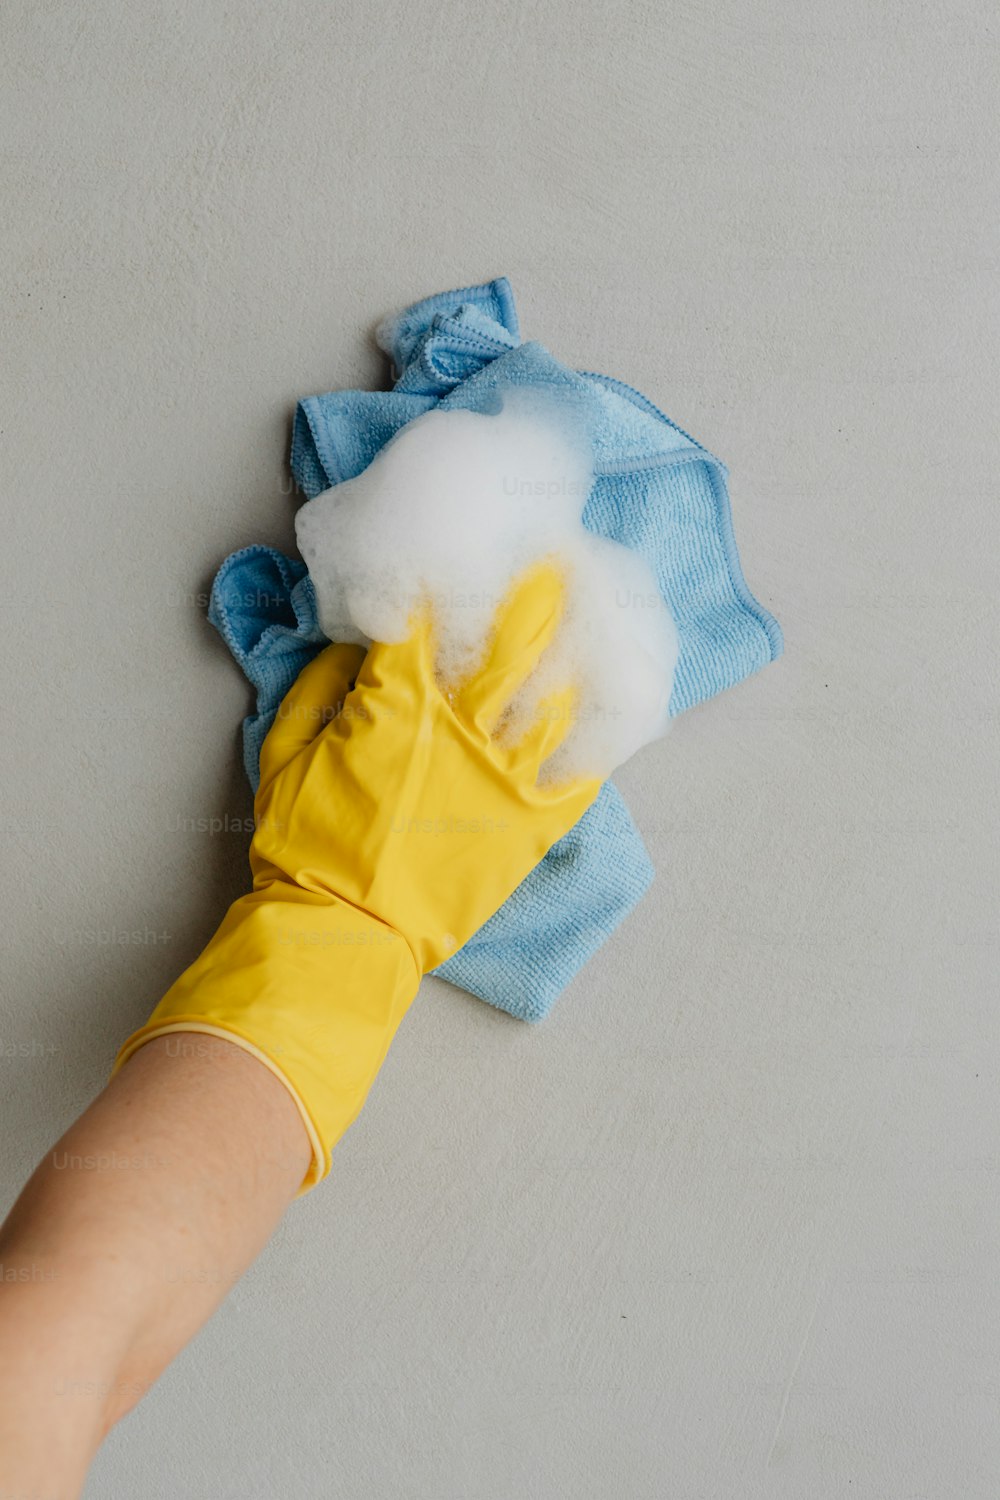 a person's hand wearing yellow rubber gloves and cleaning cloth